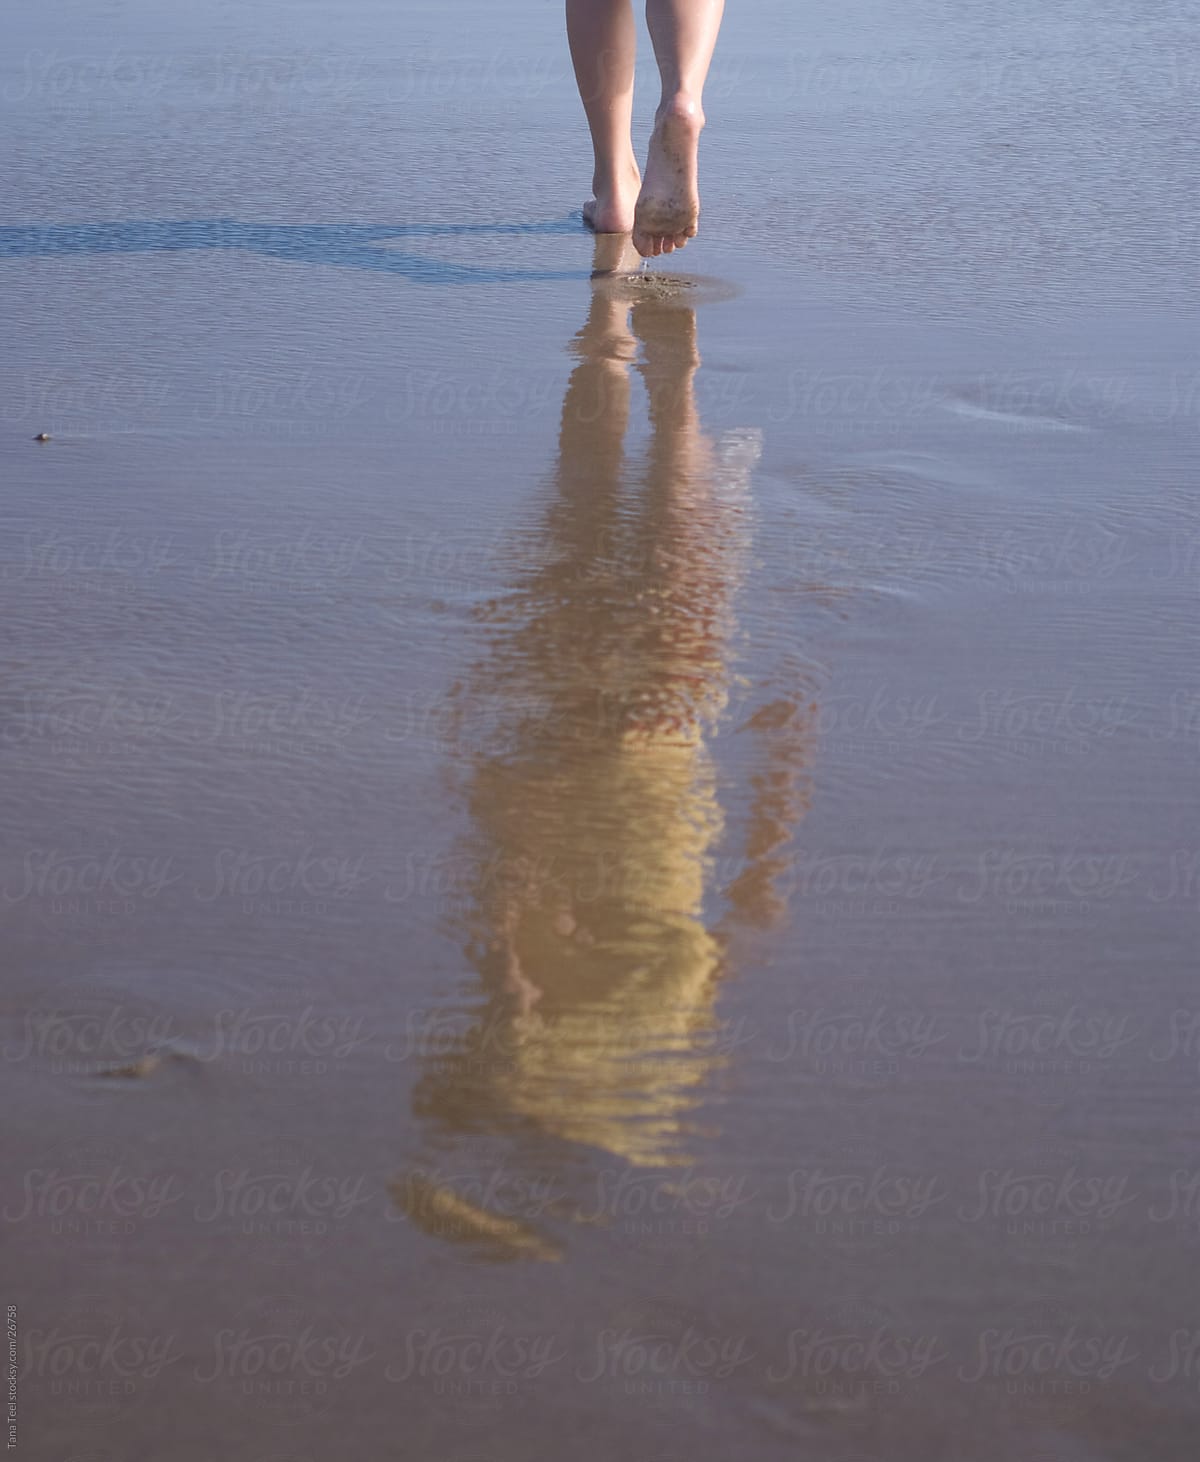 The reflection of a young girl walking along the ocean beach